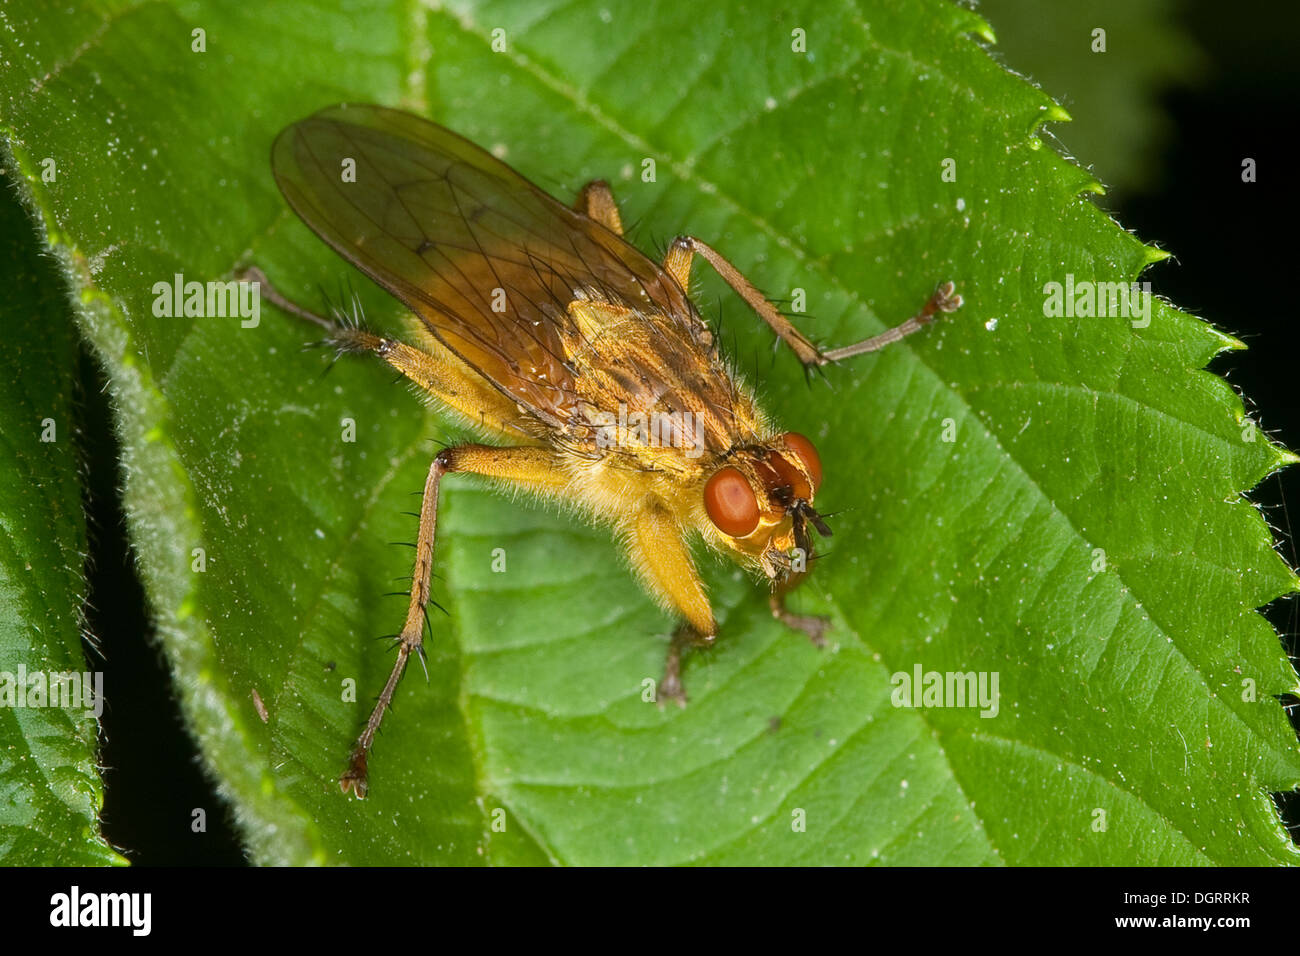 yellow dungfly, yellow dung fly, Gelbe Dungfliege, Mistfliege, Scathophaga stercoraria, Scatophaga stercoraria Stock Photo